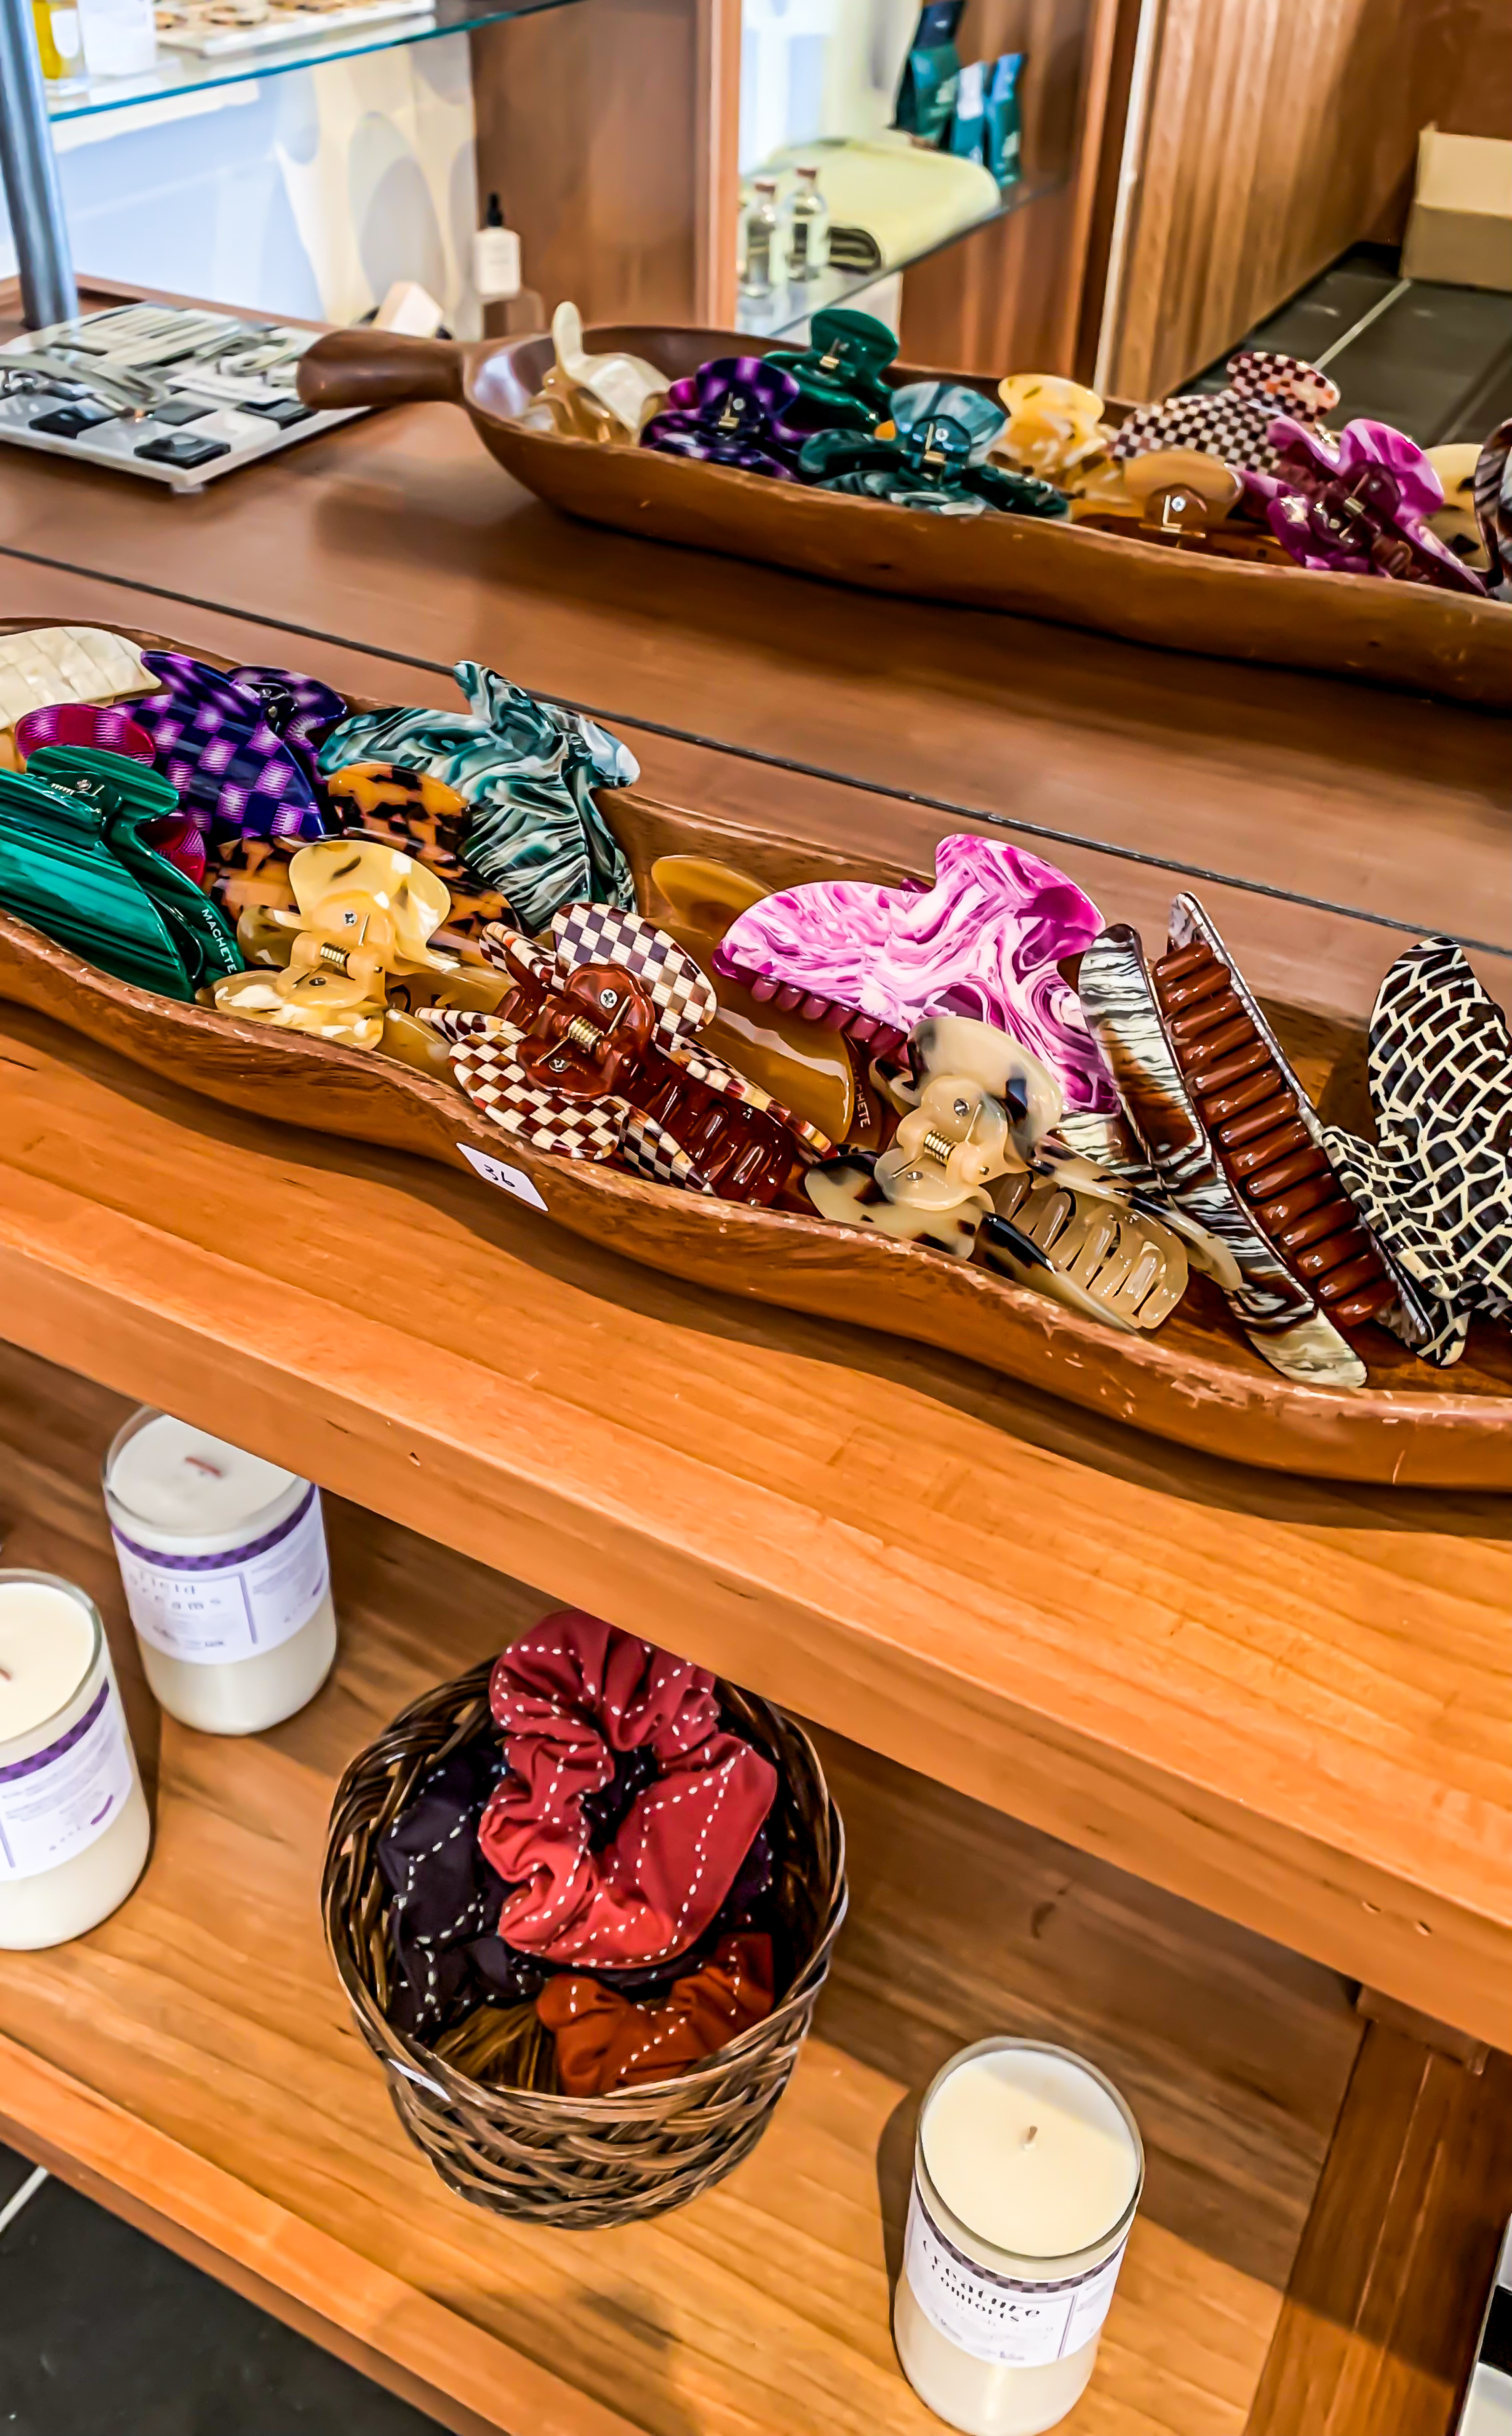 Machete Hair Claw display at Green & Bean boutique in Annapolis maryland. The bottom shelf has a basket of scrunchies and there is a mirror to reflect the wooden container of hair claws